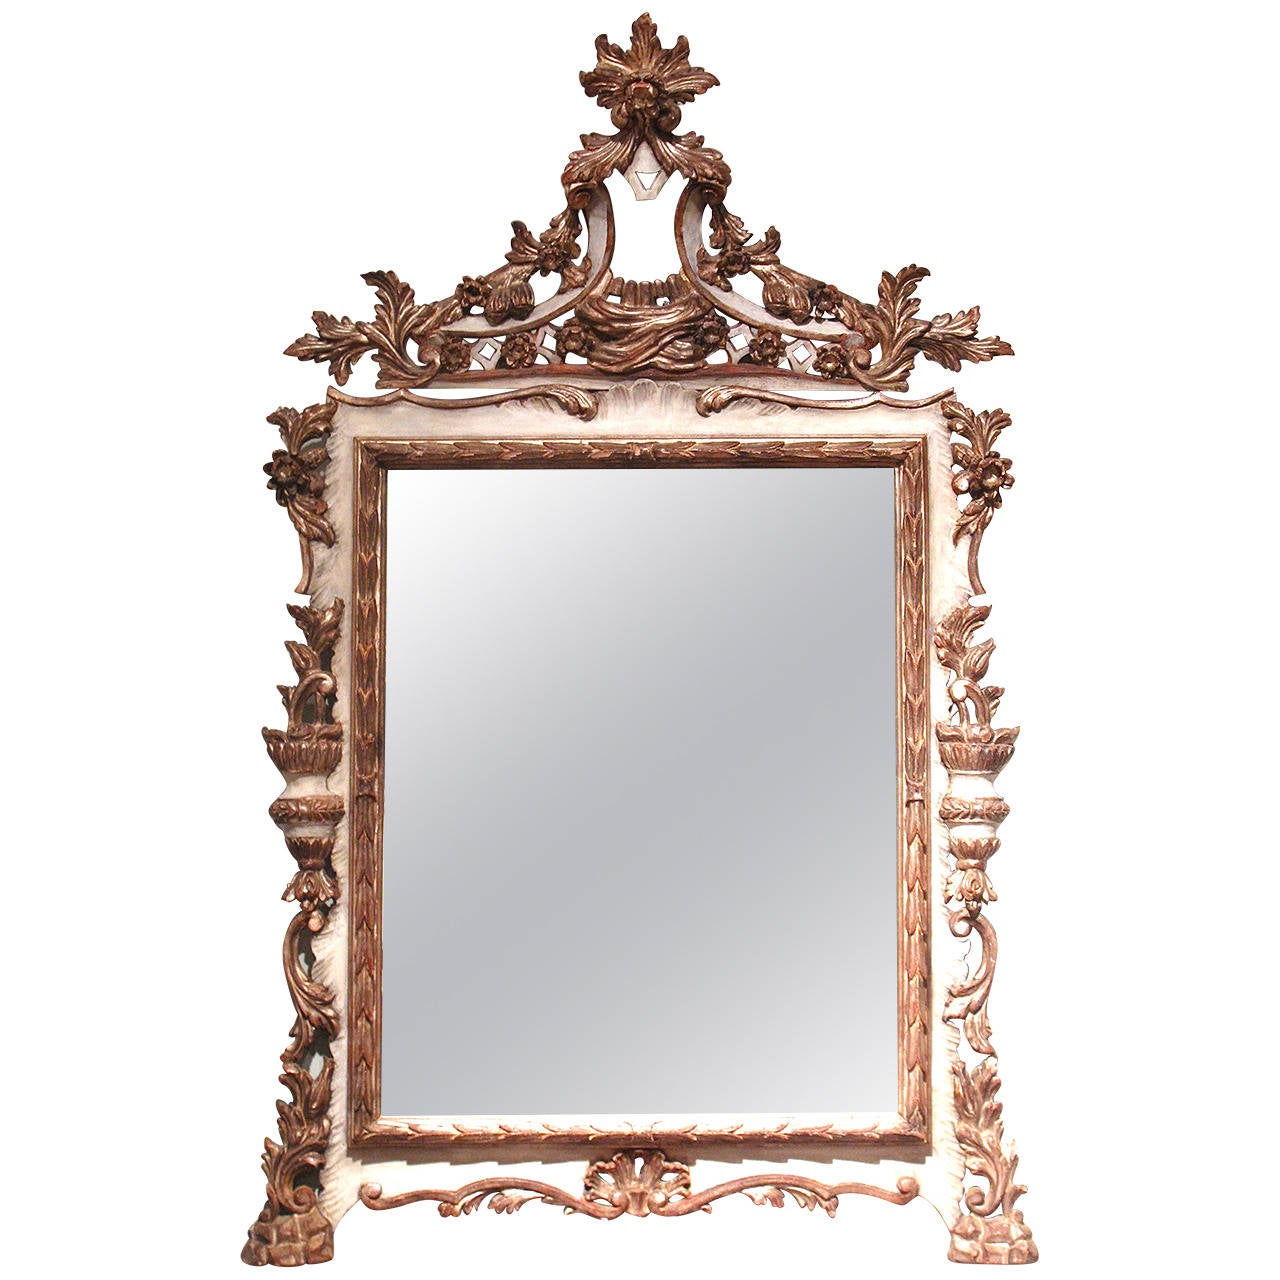 Italian Rococo Style Painted and Silver Gilt Mirror at 1stdibs